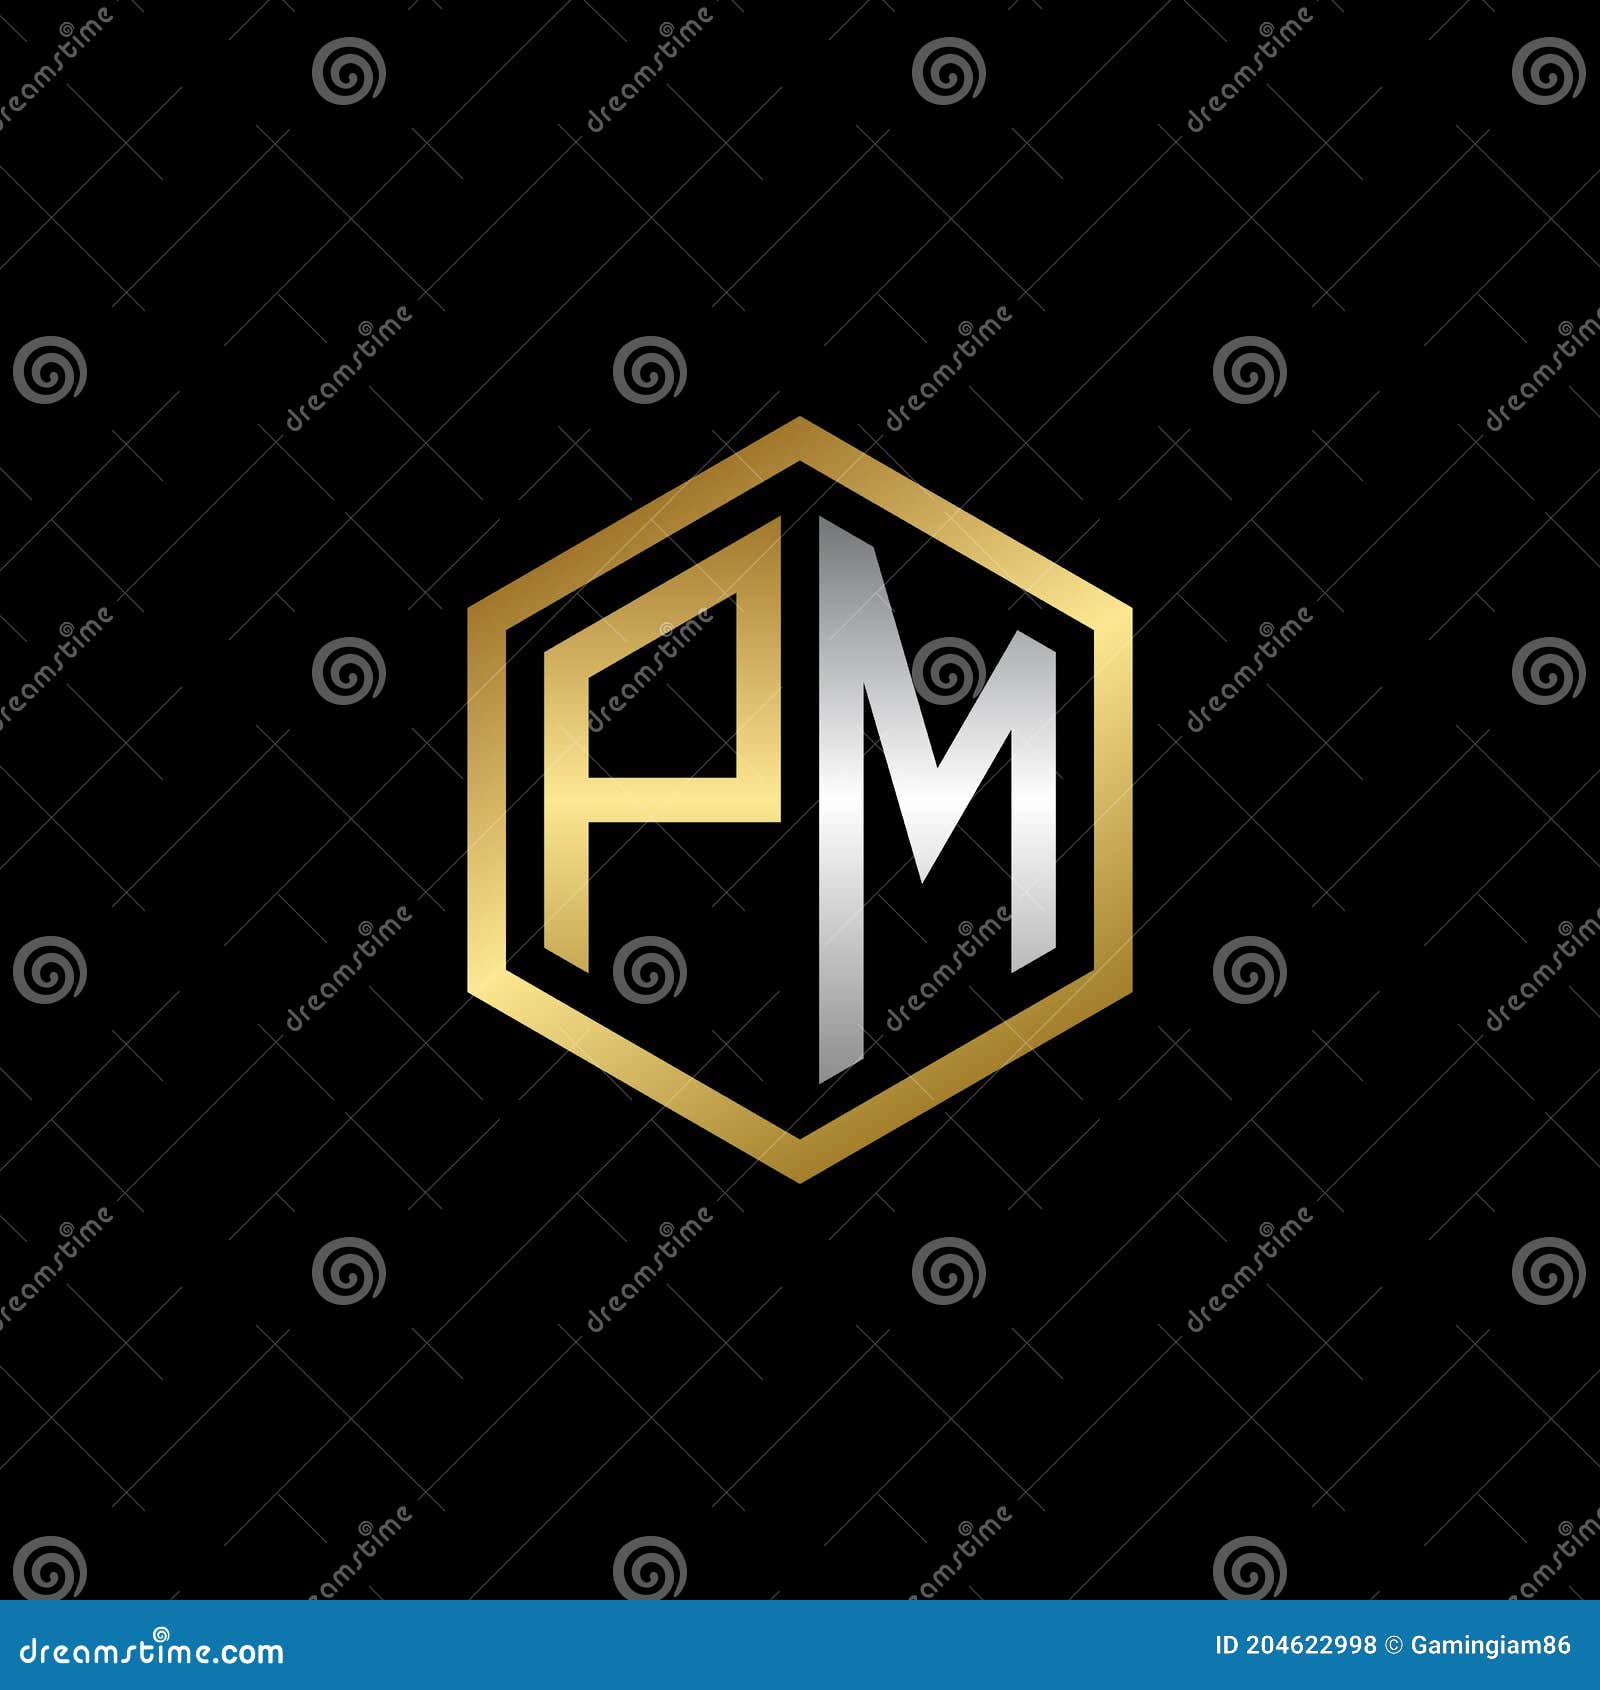 Letter Pm Logo Colorful Geometric Shape Stock Vector (Royalty Free